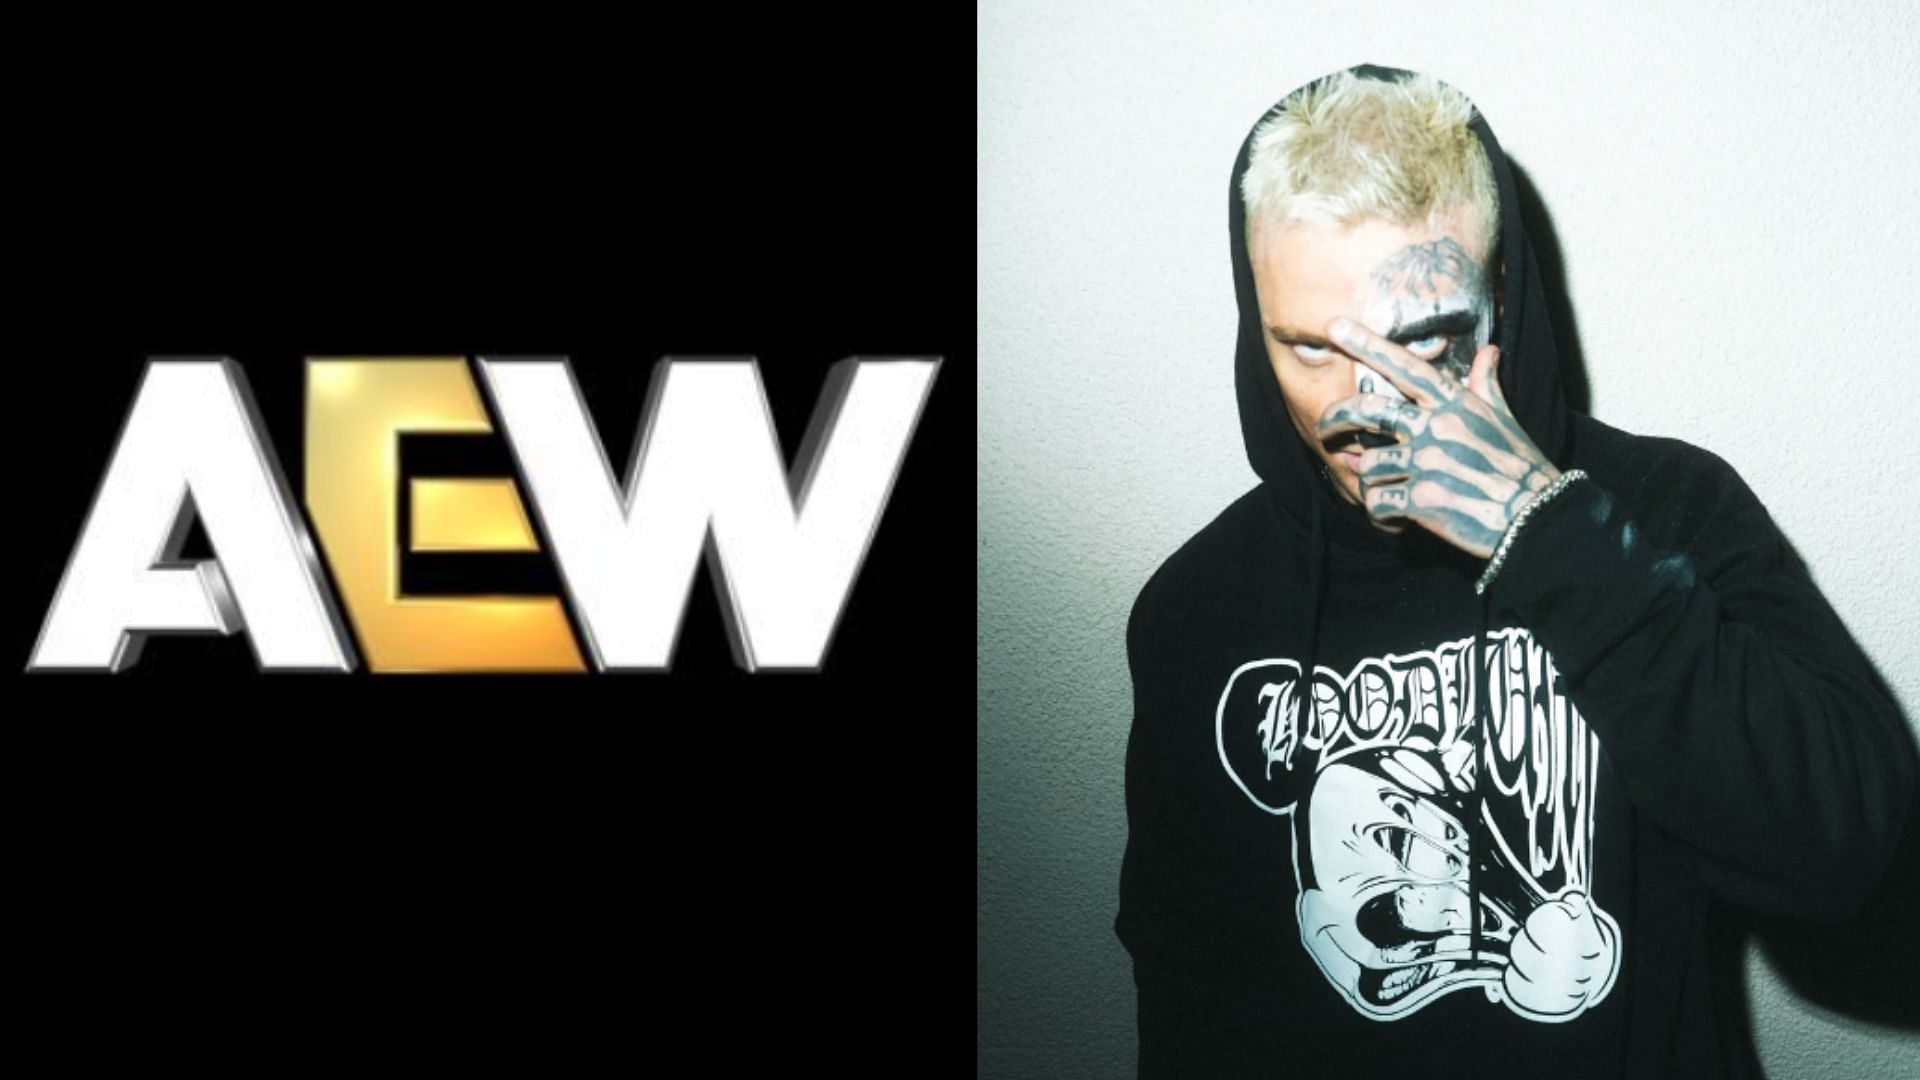 Darby Allin is a two-time AEW TNT Champion [Image Credits: Darby Allin